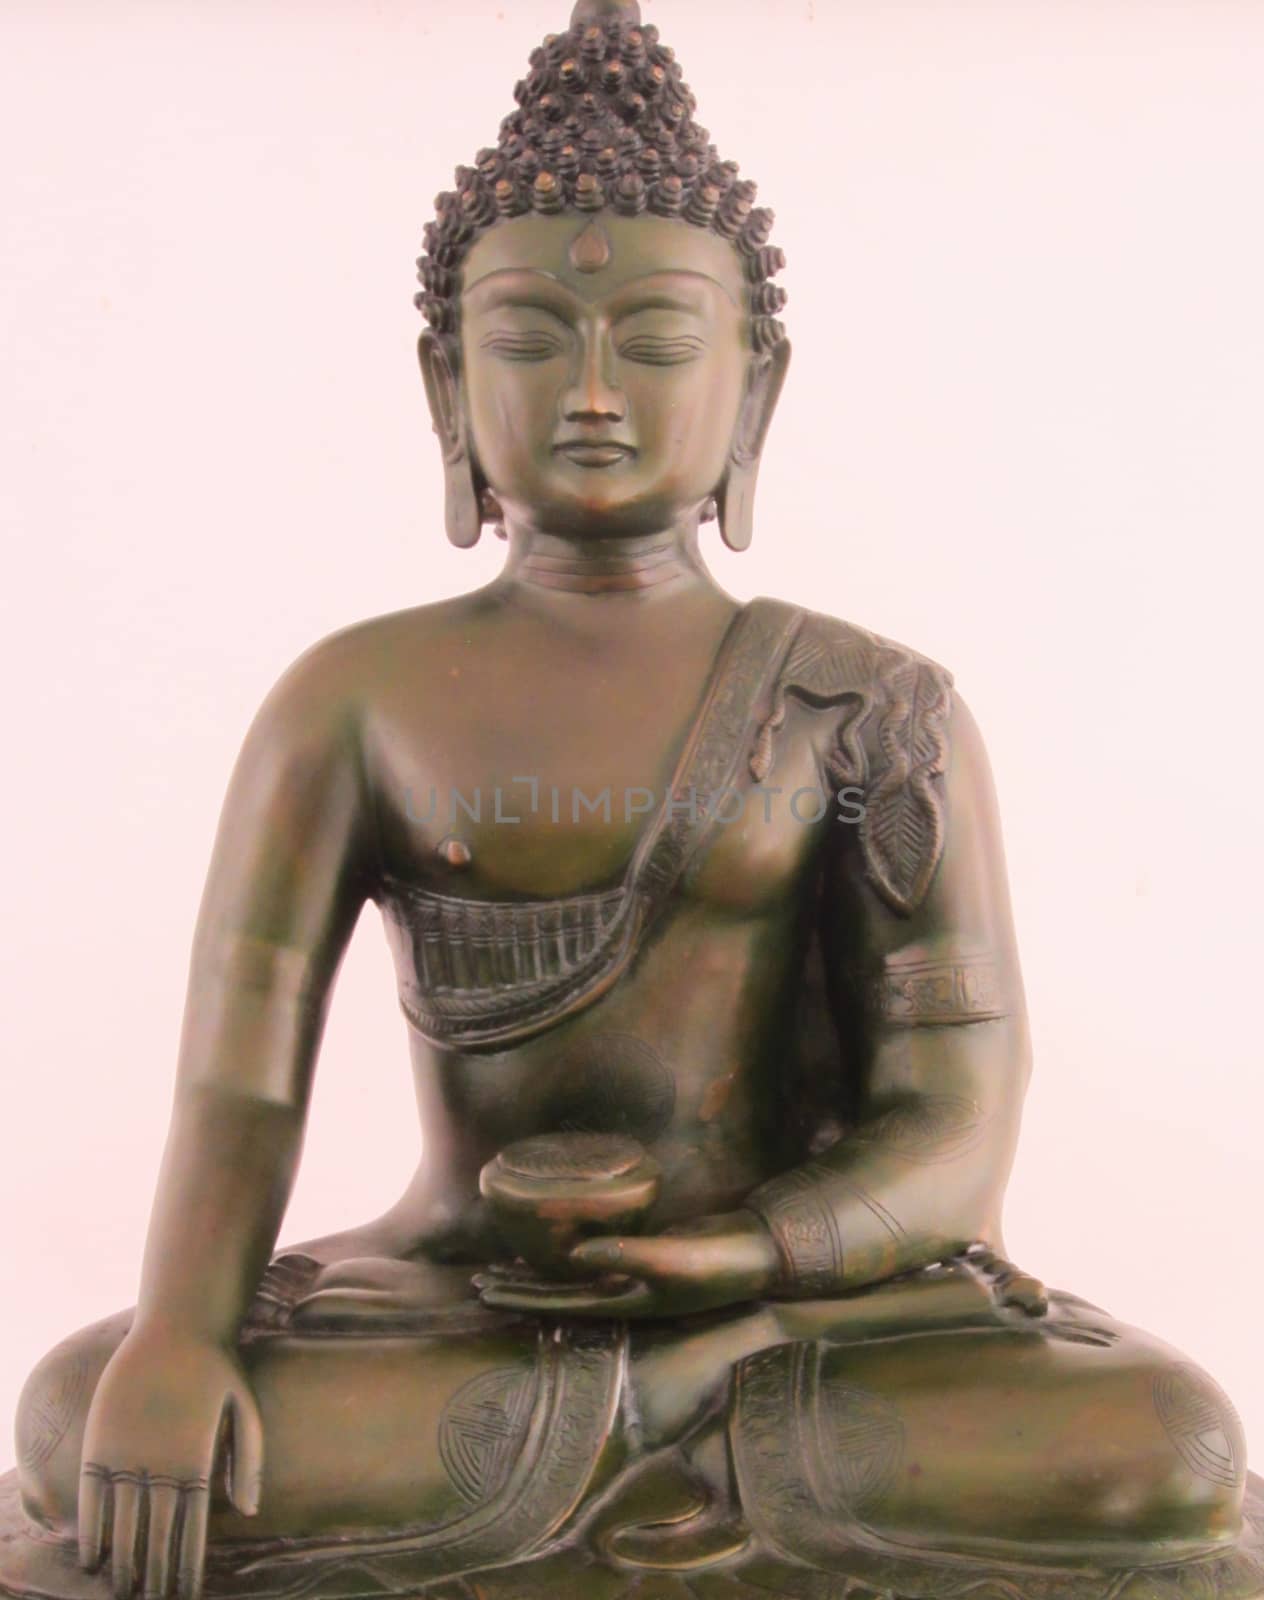 Golden, closed eye Buddha statue is sitting in front of a white background.